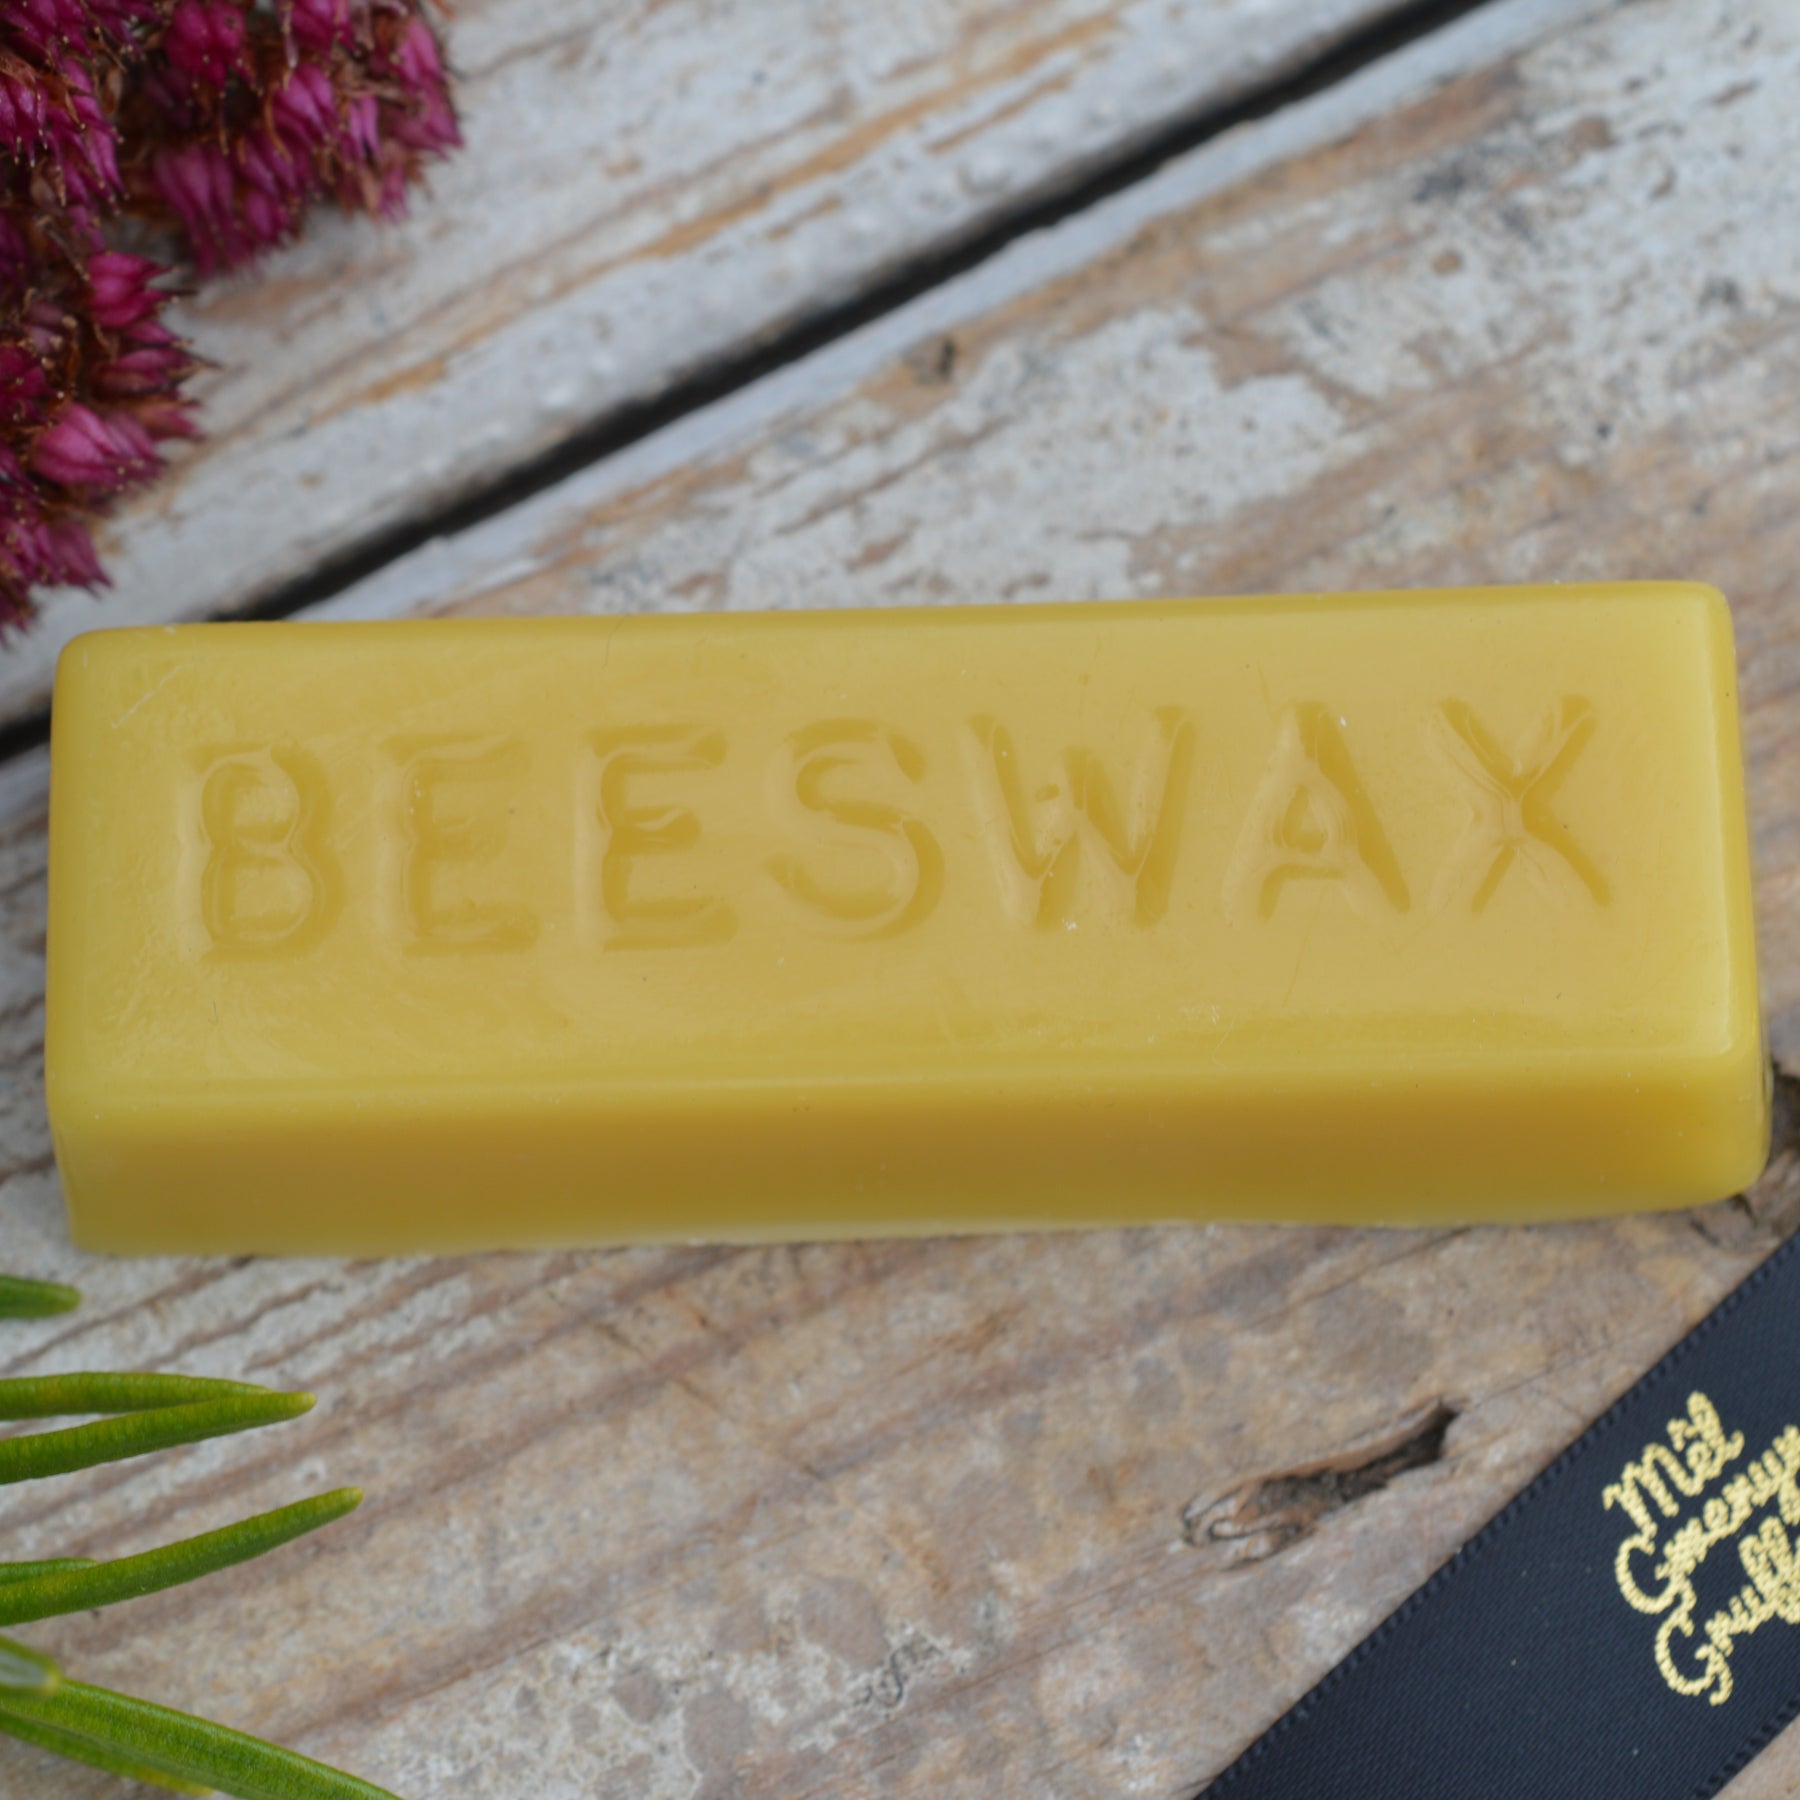 100% Pure Beeswax Direct from a Beekeeper – Ames Farm Single